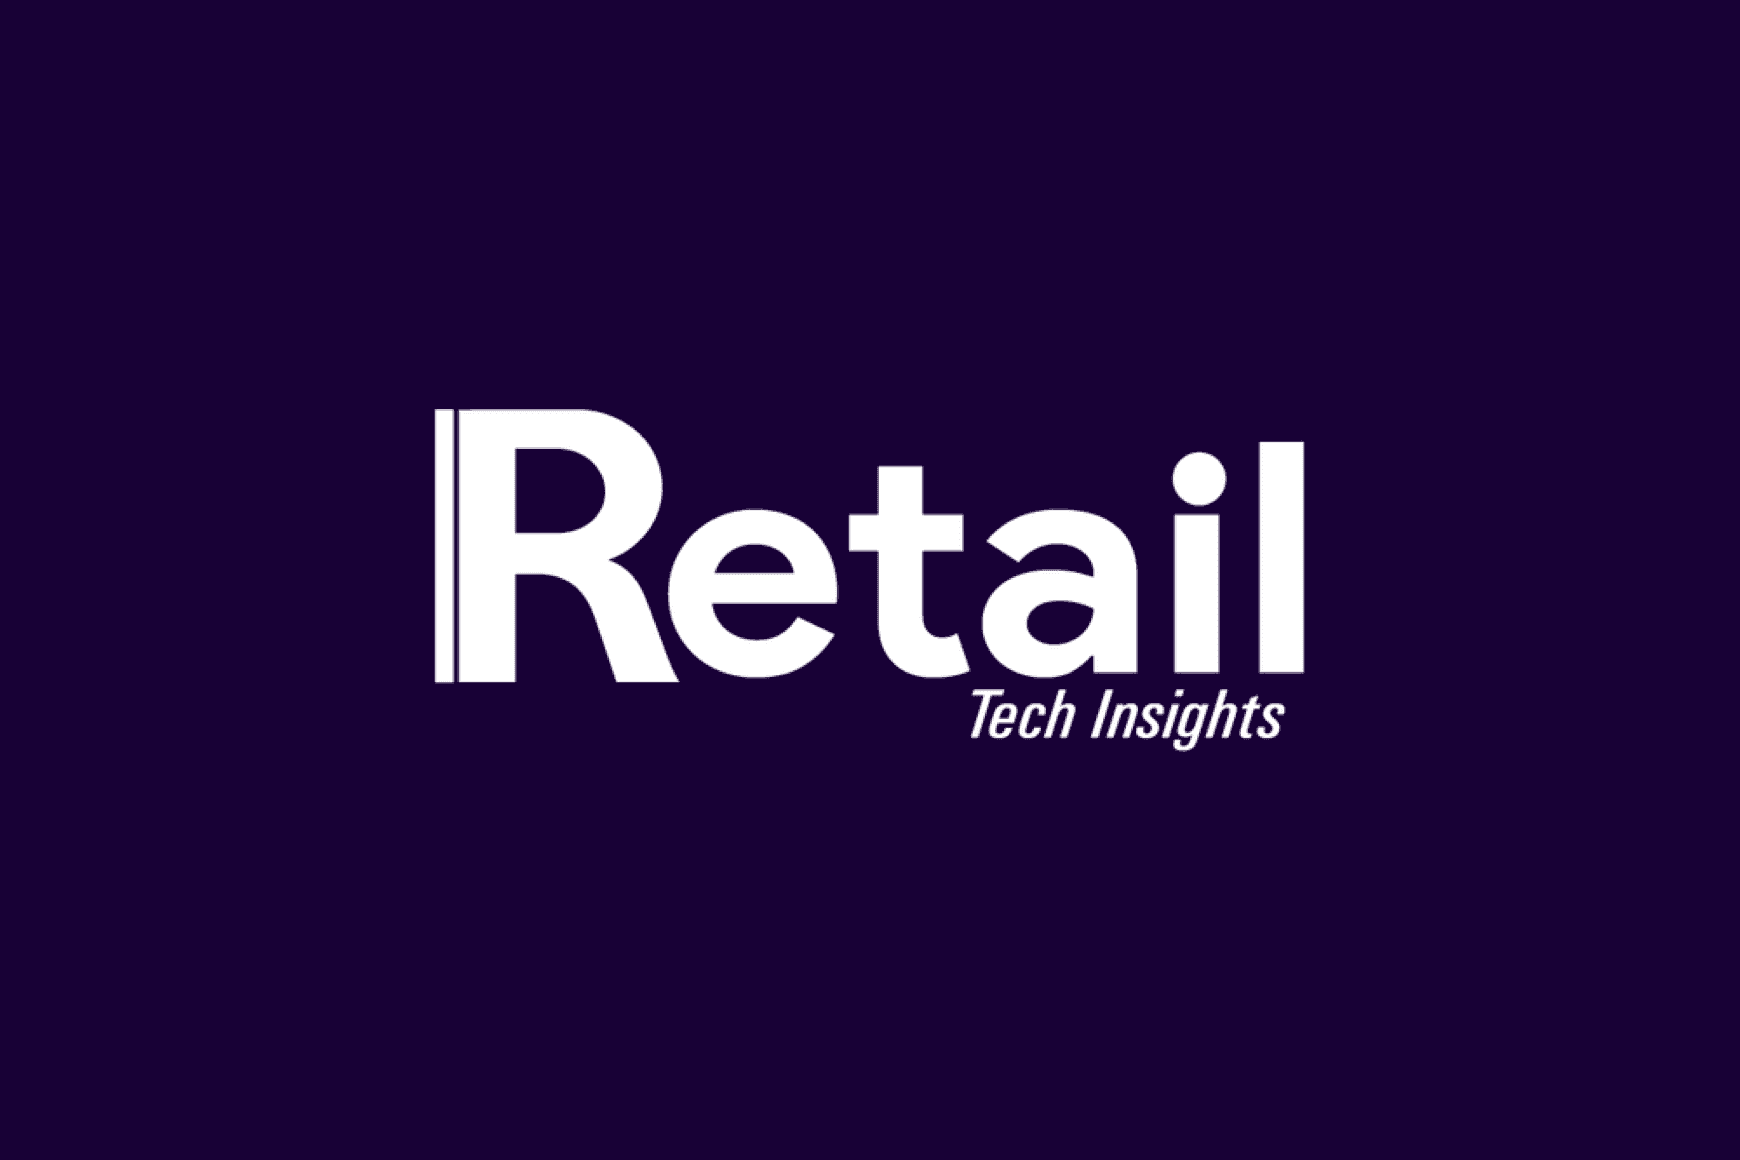 Talkdesk awarded Top Canada Retail Tech Solutions provider 2022 by Retail Tech Insights